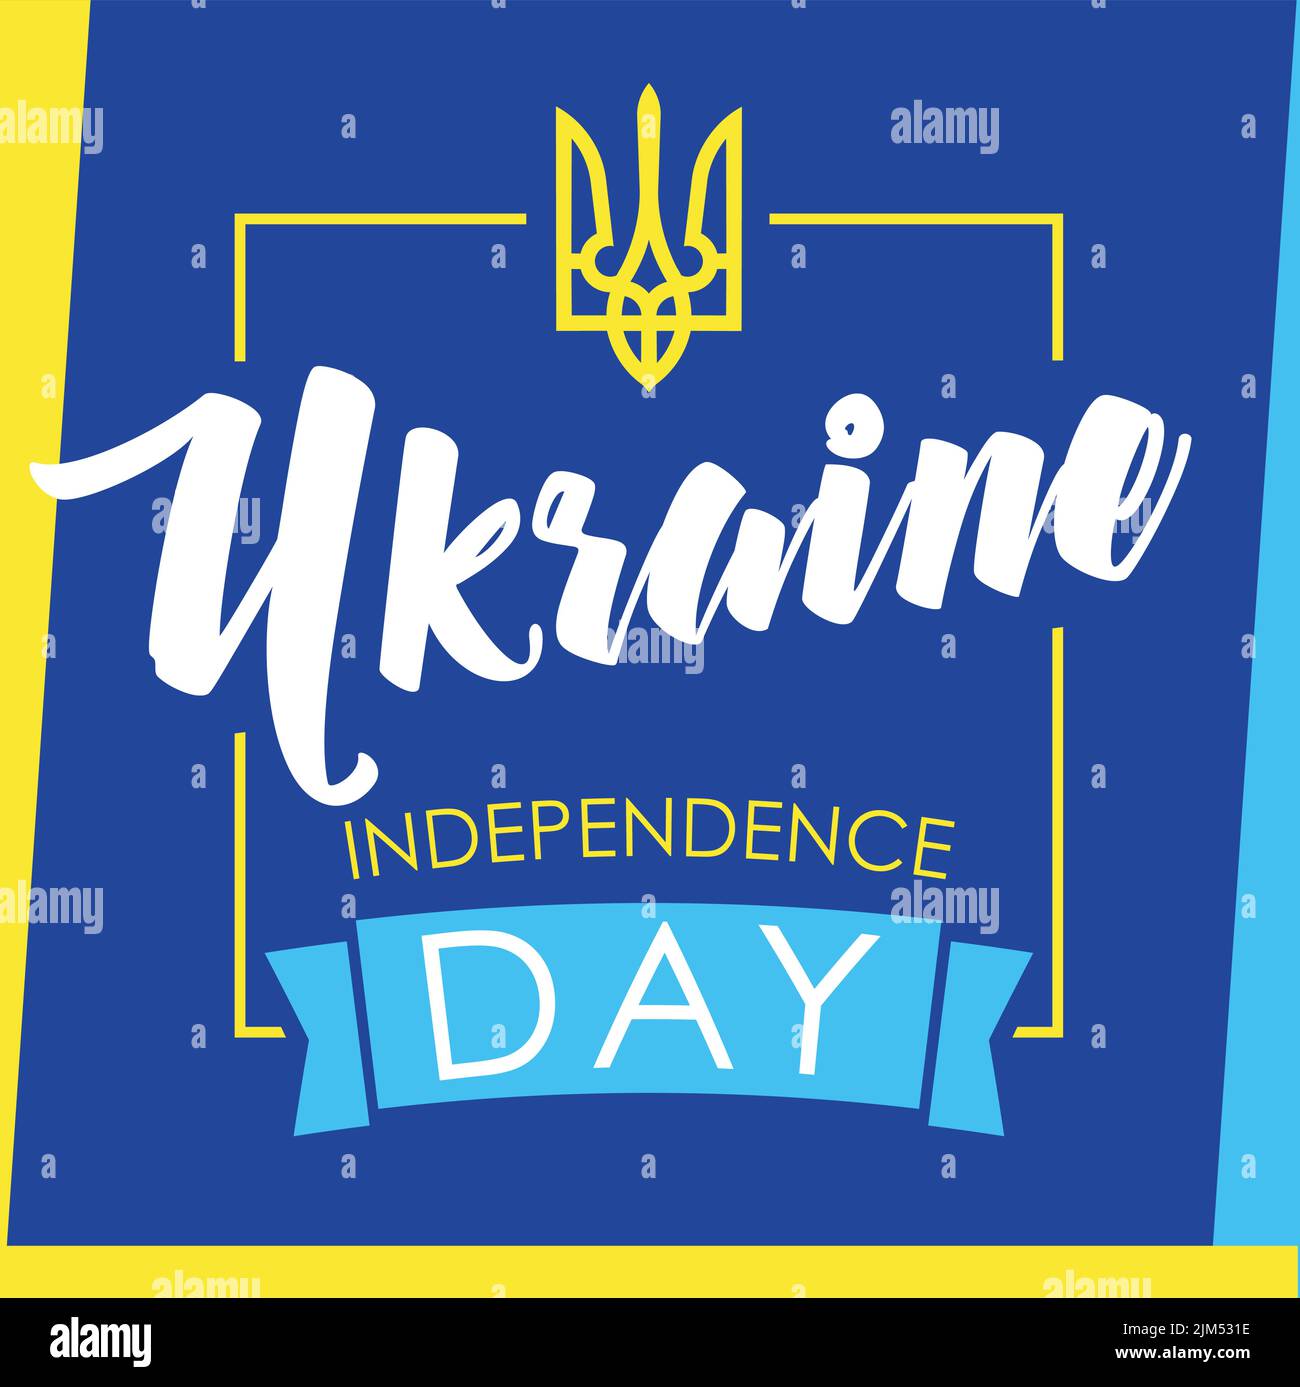 Happy Independence Day, Ukraine Creative congrats. Ukrainian holiday. Isolated abstract graphic design template. White, yellow and blue colors. Stock Vector